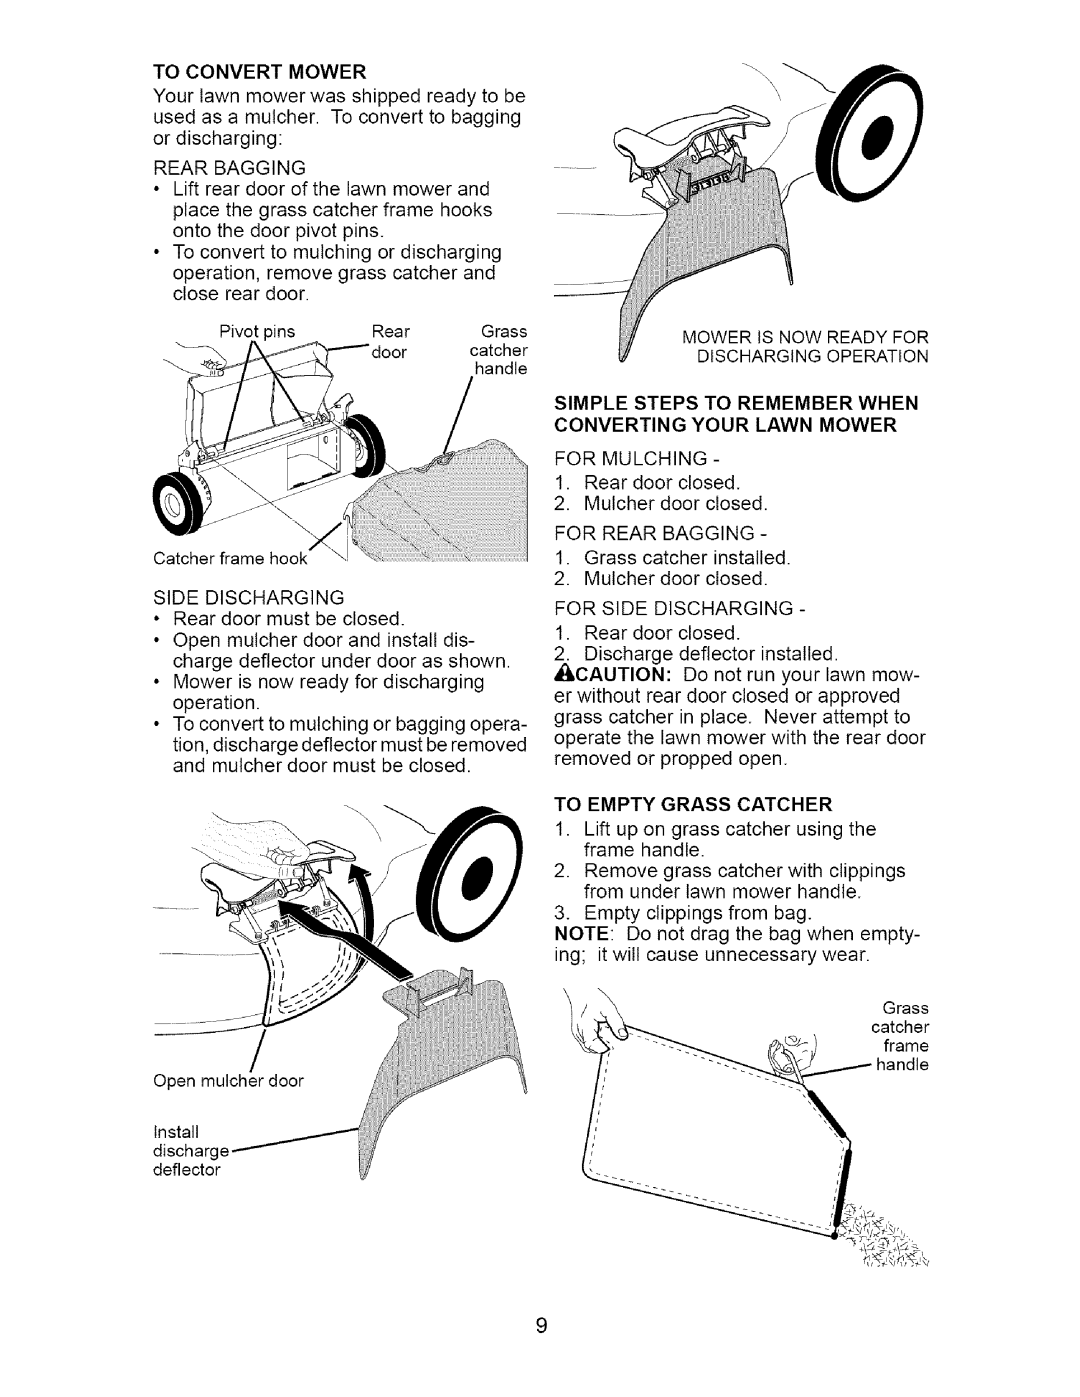 Craftsman 917.37172 owner manual To Convertmower, Simple Steps To Remember When, Converting Your Lawn Mower For Mulching 